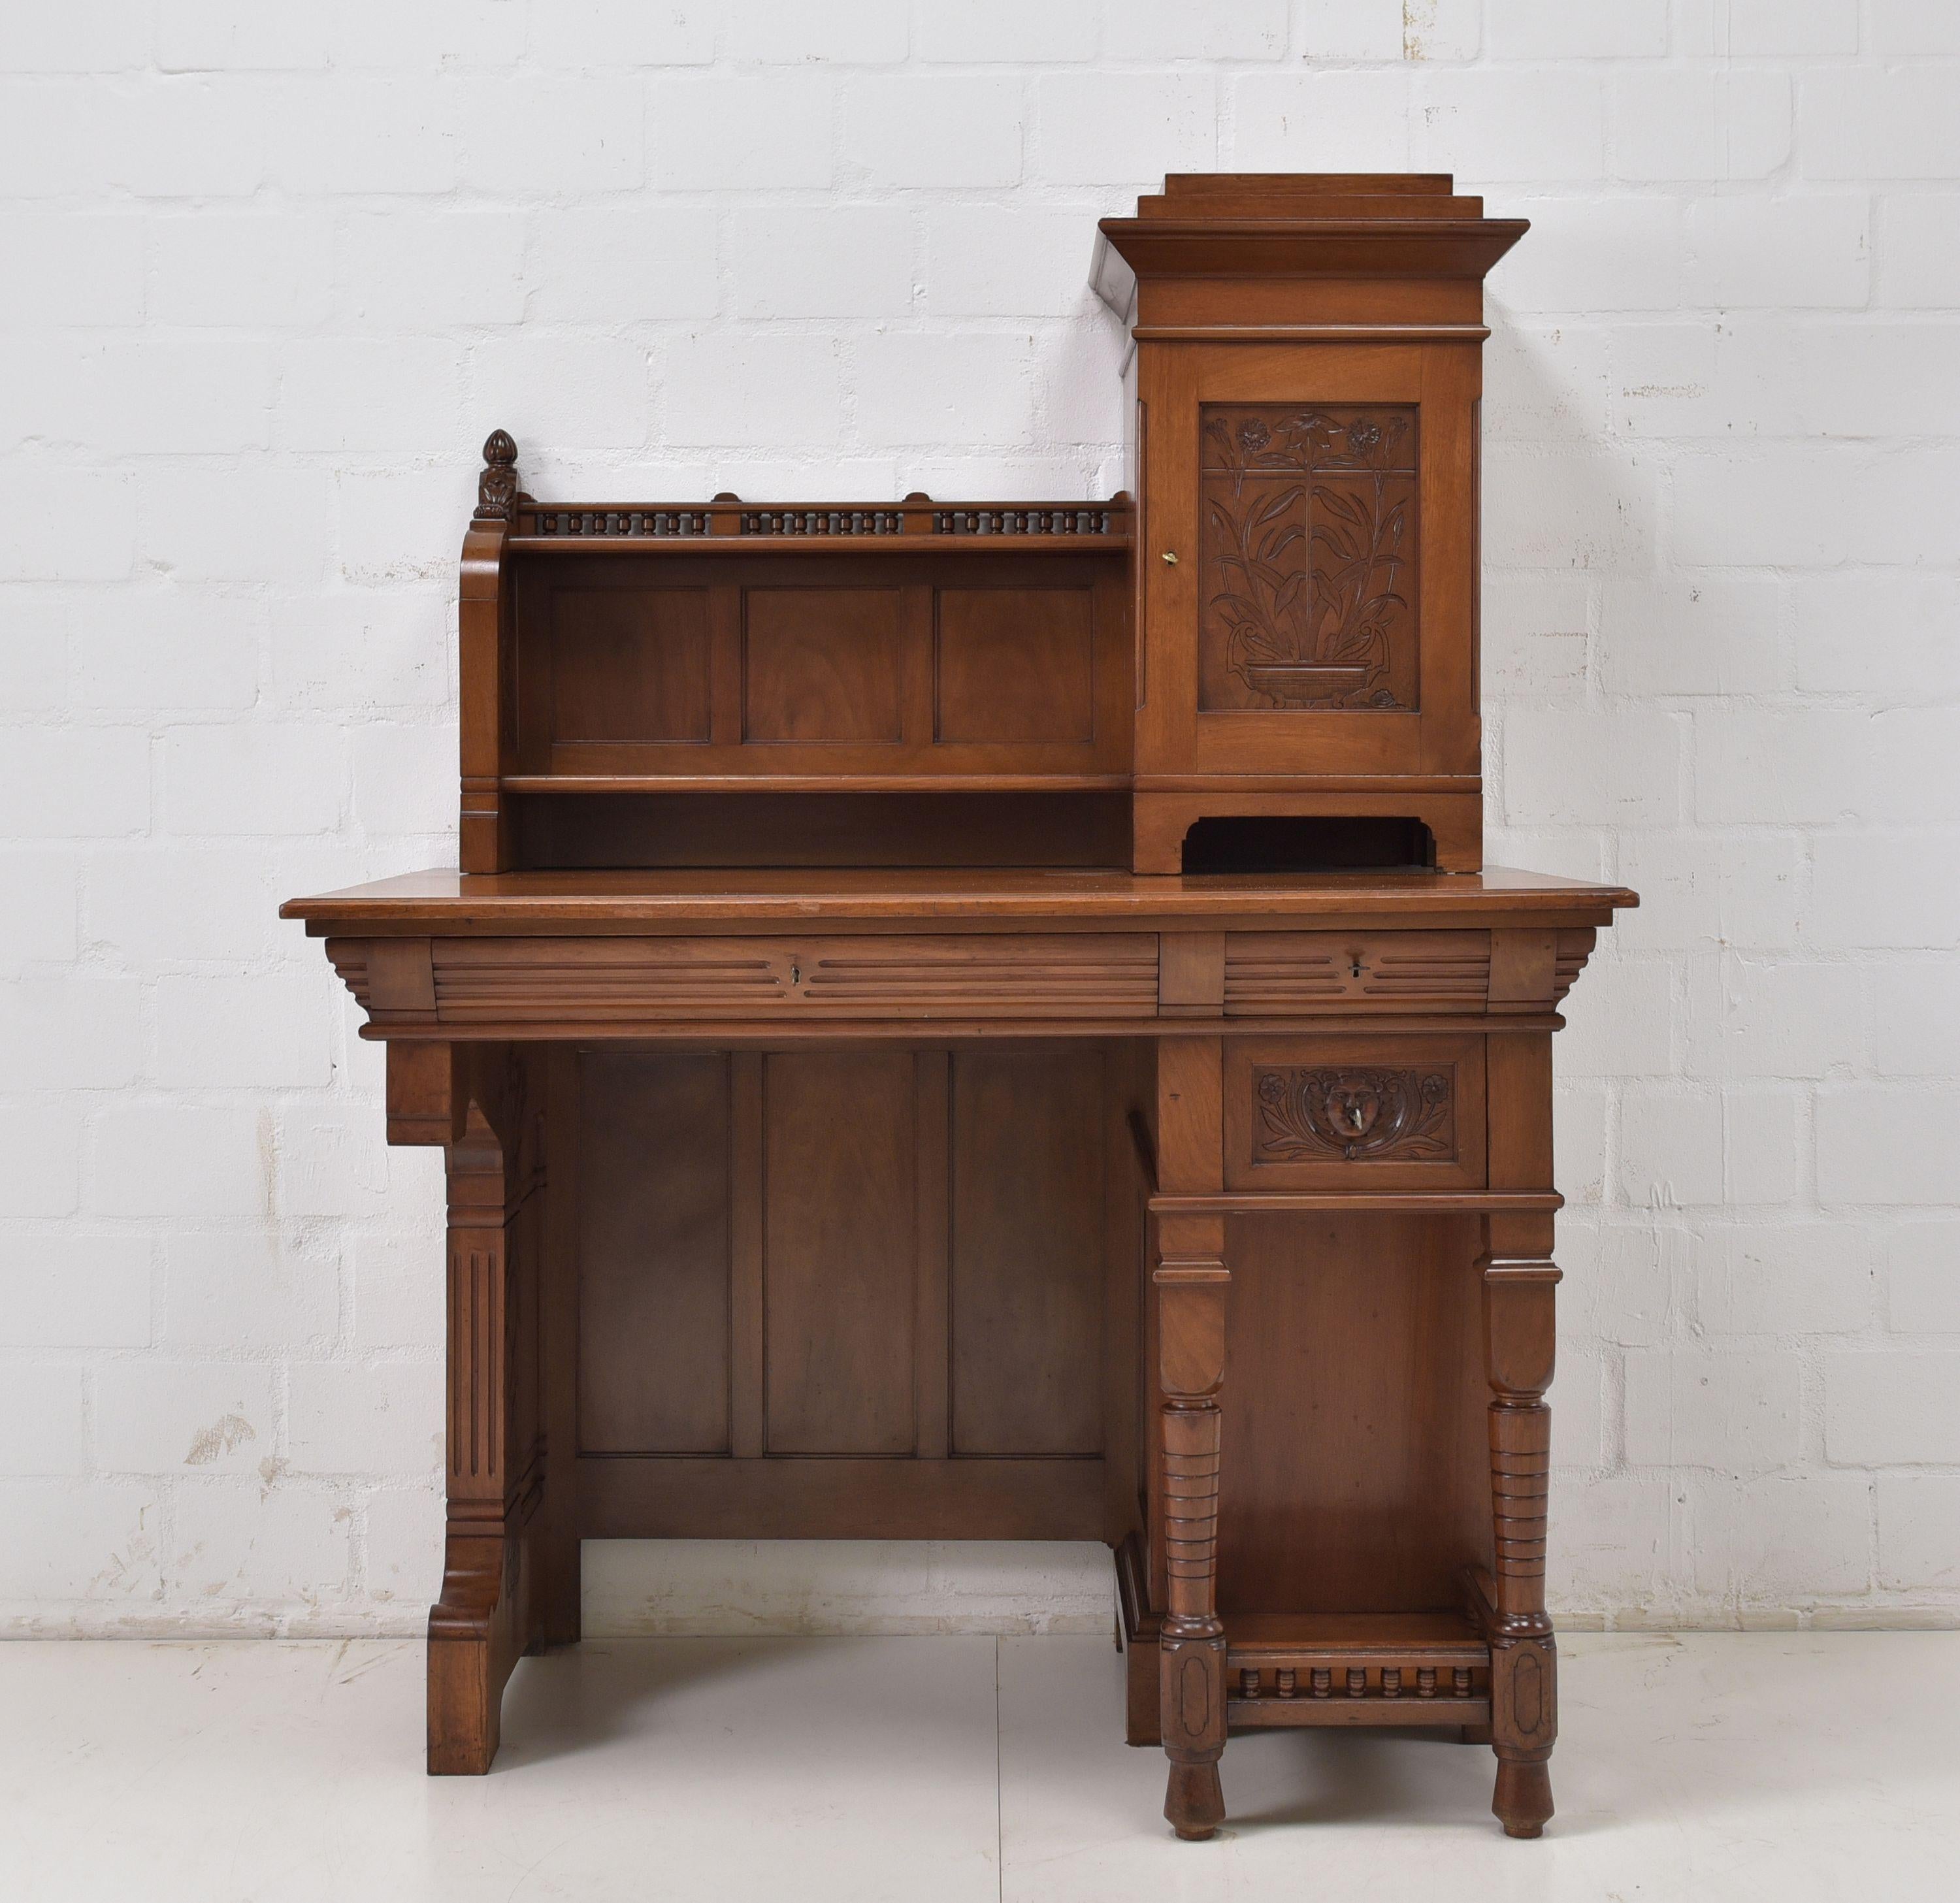 Restoration desk Art Nouveau walnut lady's desk

Features:
Asymmetrical model with two drawers and various compartments / doors
Very high quality processing
Heavy quality
Elaborately thought-out design
All drawers dovetailed
Beautiful carved